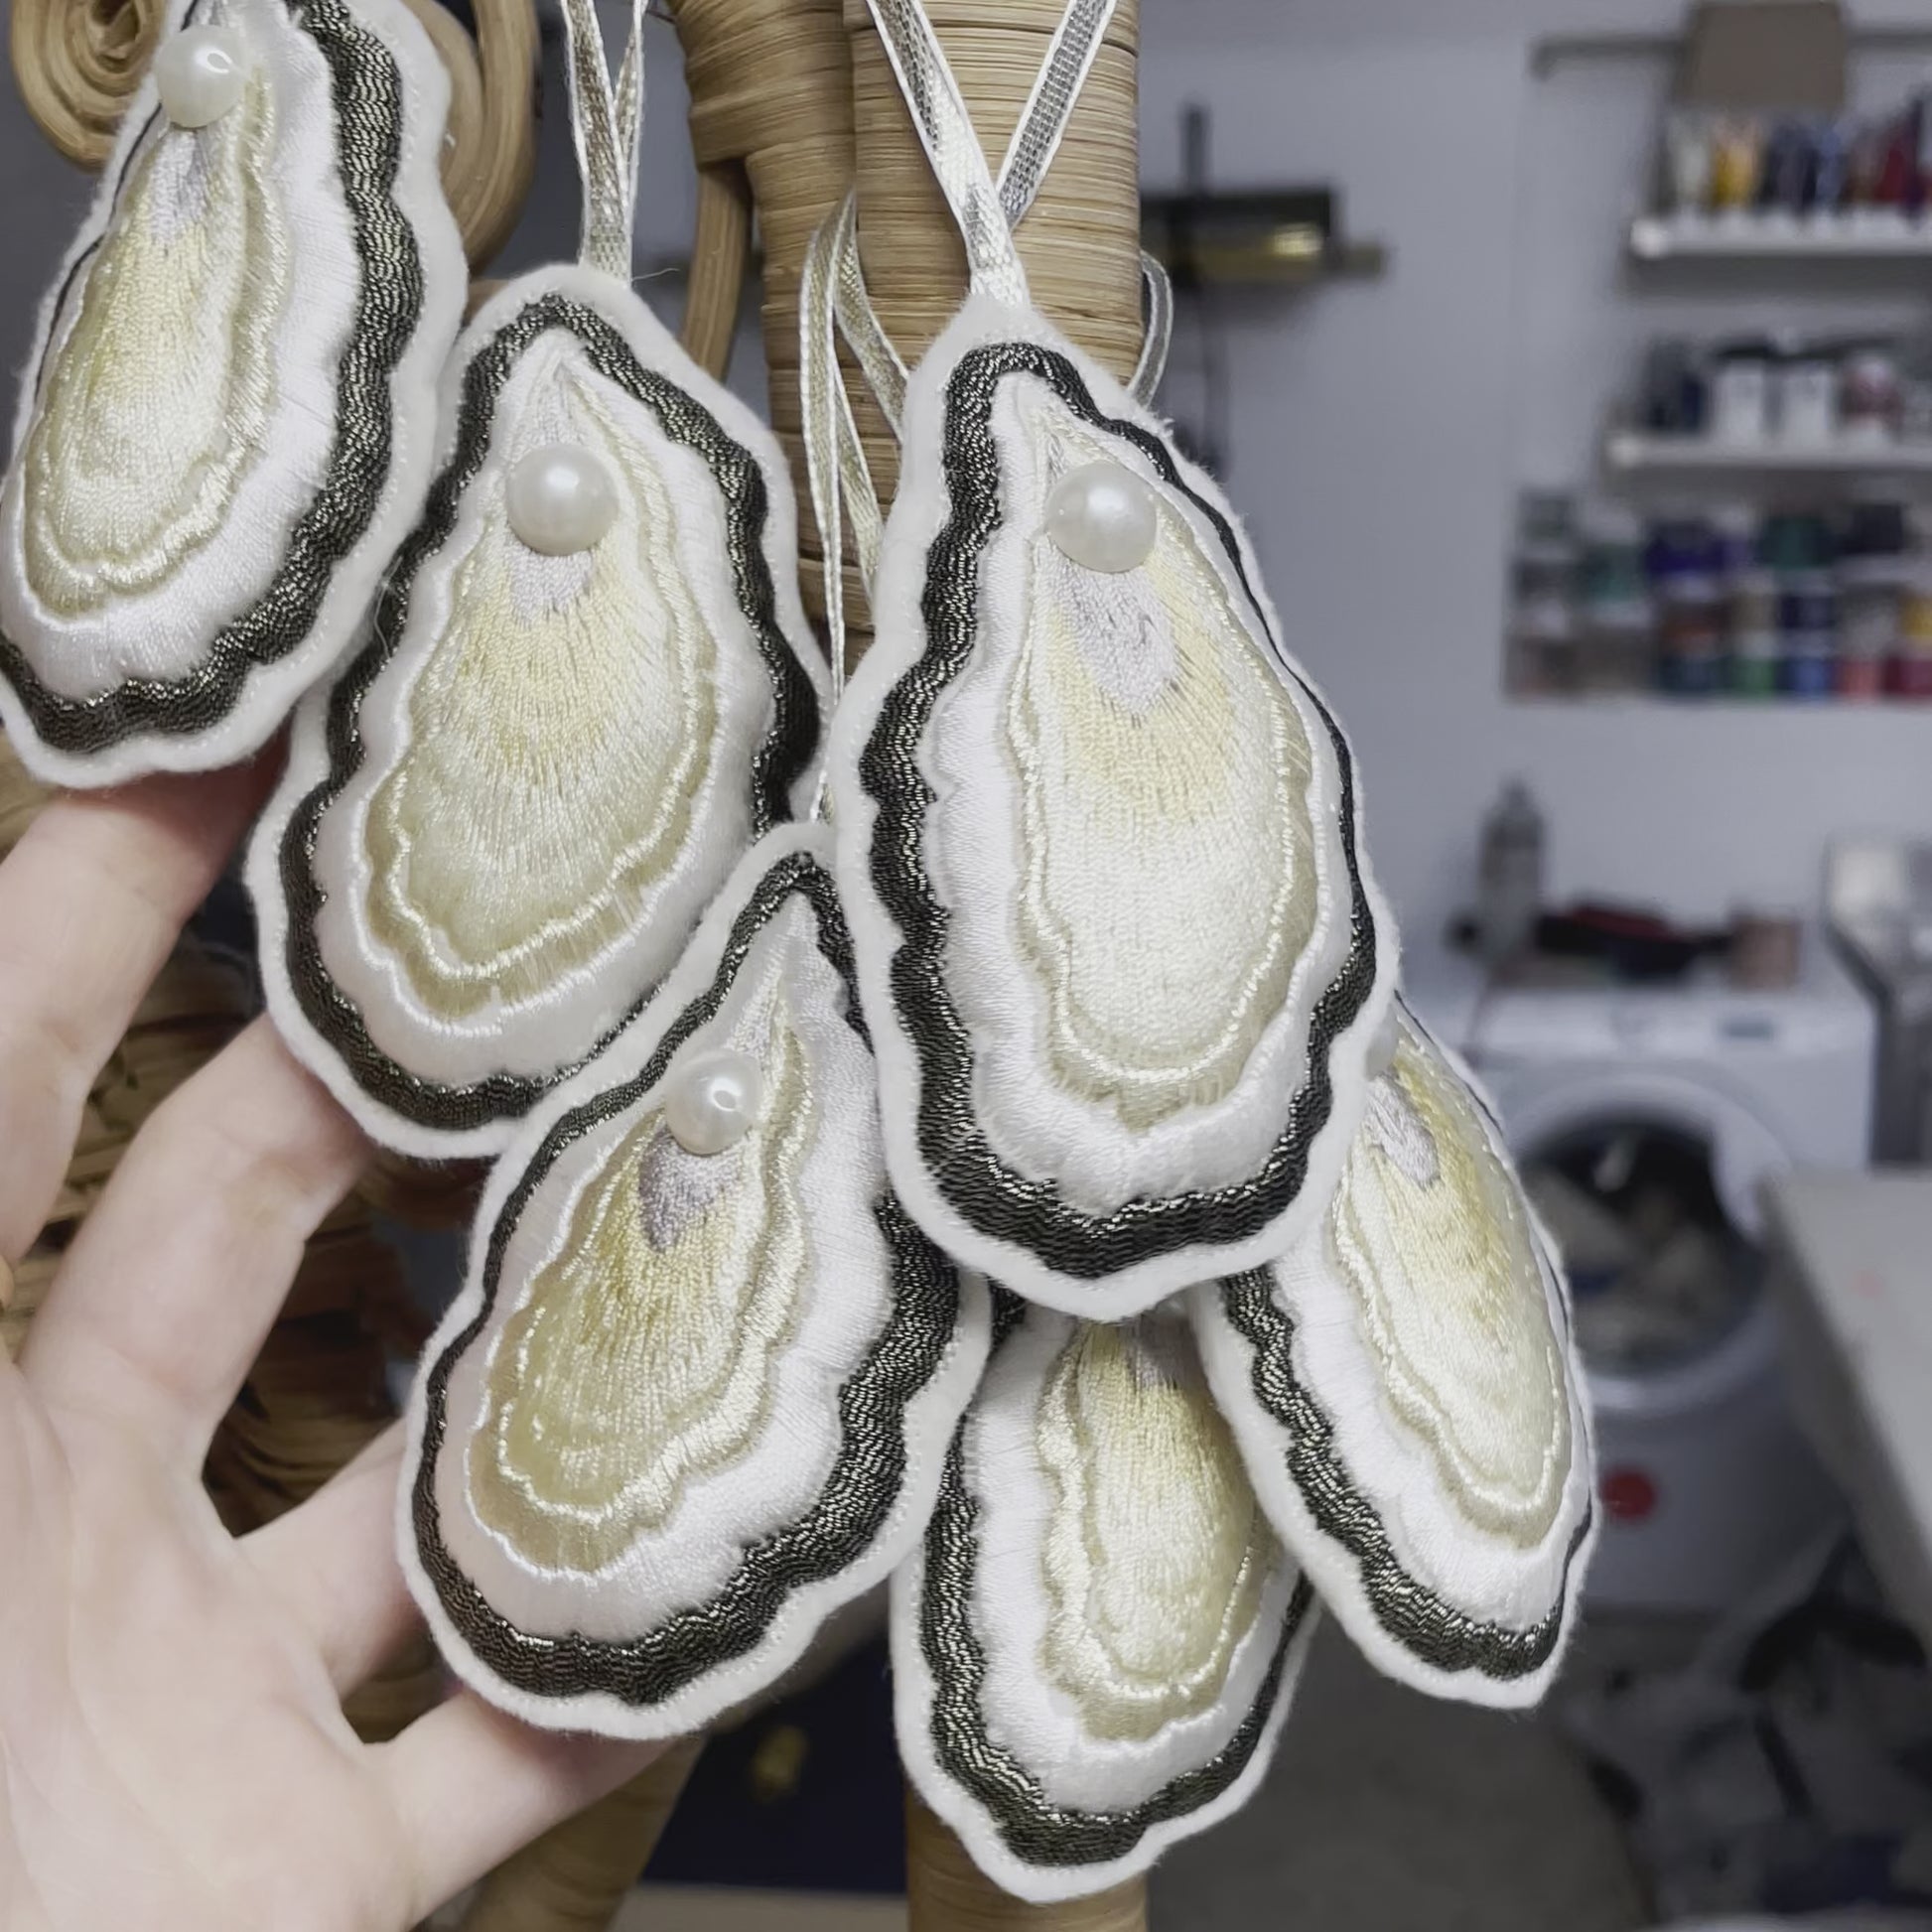 Video of a bunch of embroidered oyster decorations hanging on a rattan screen, shown close-up